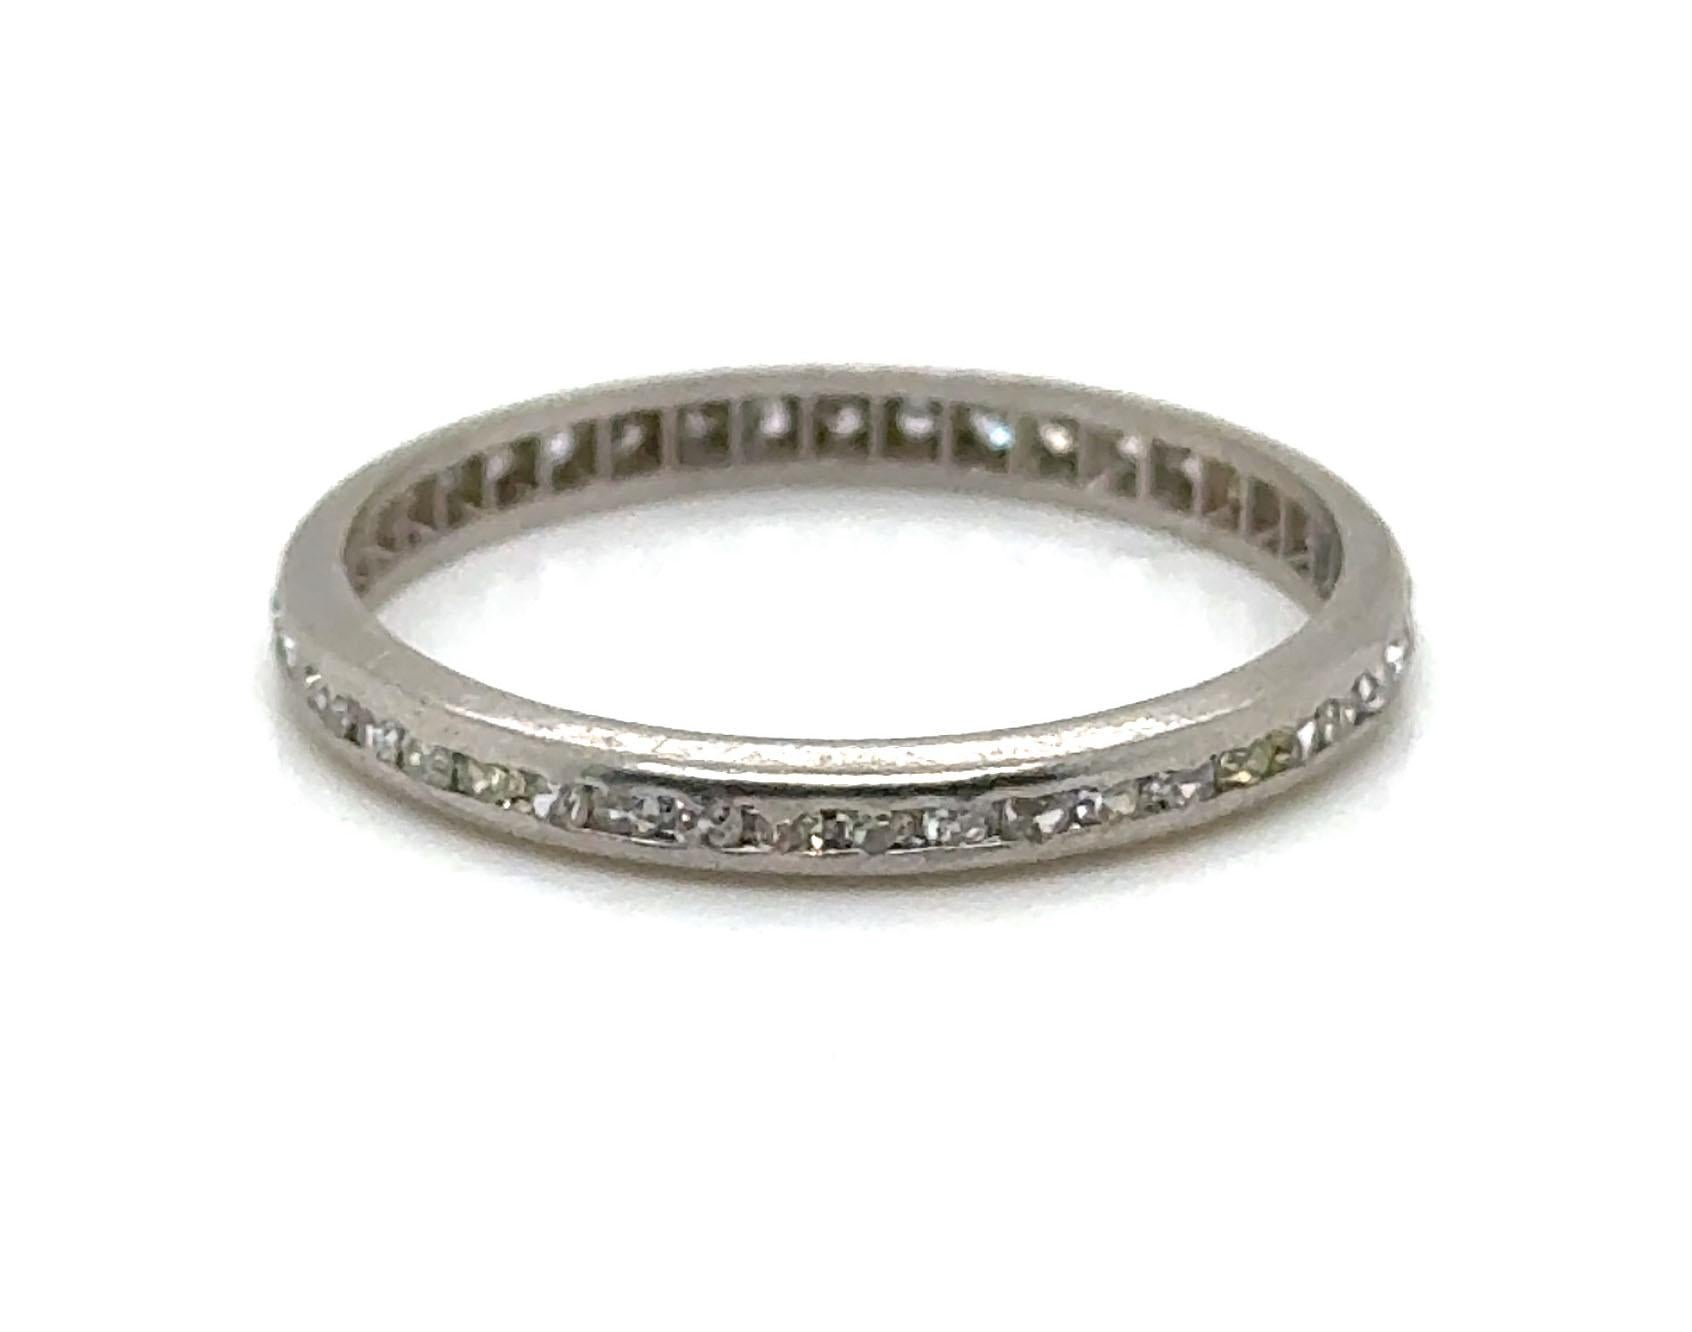 Round Cut Deco Genuine Antique Diamond Band .75ct Single Cuts Dated 12-13-35 Platinum Ring For Sale